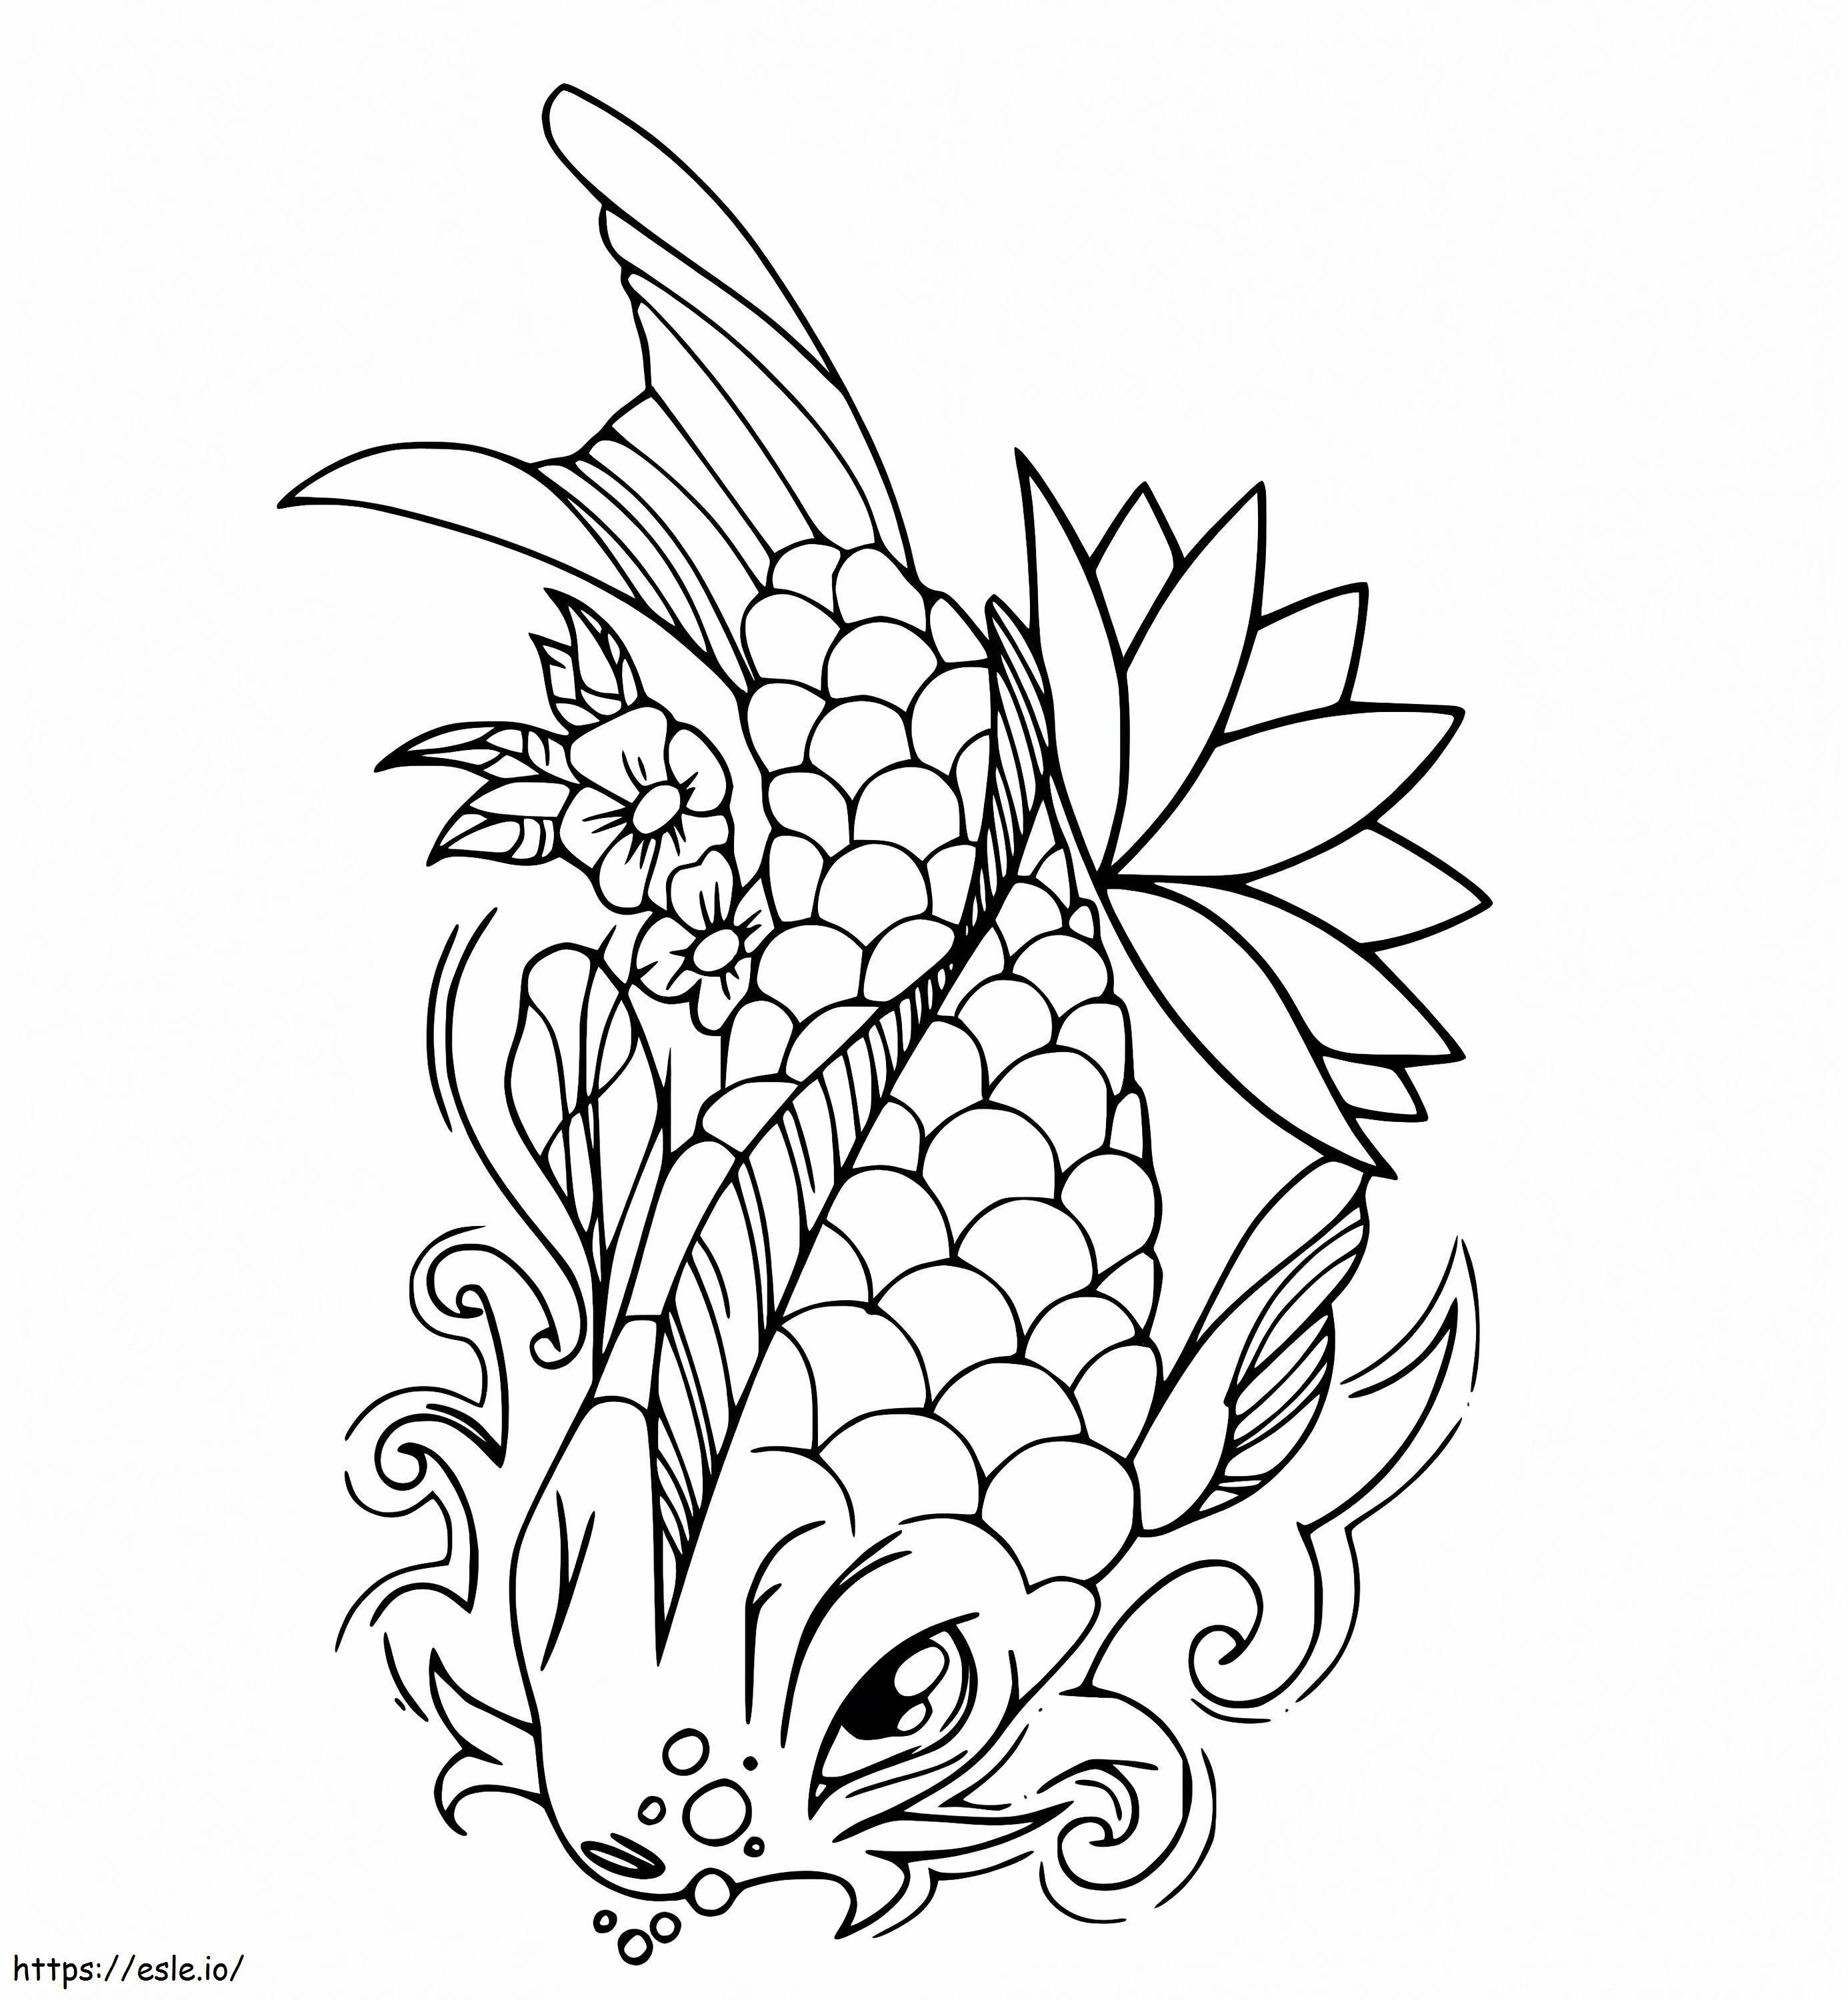 Lovely Carp coloring page